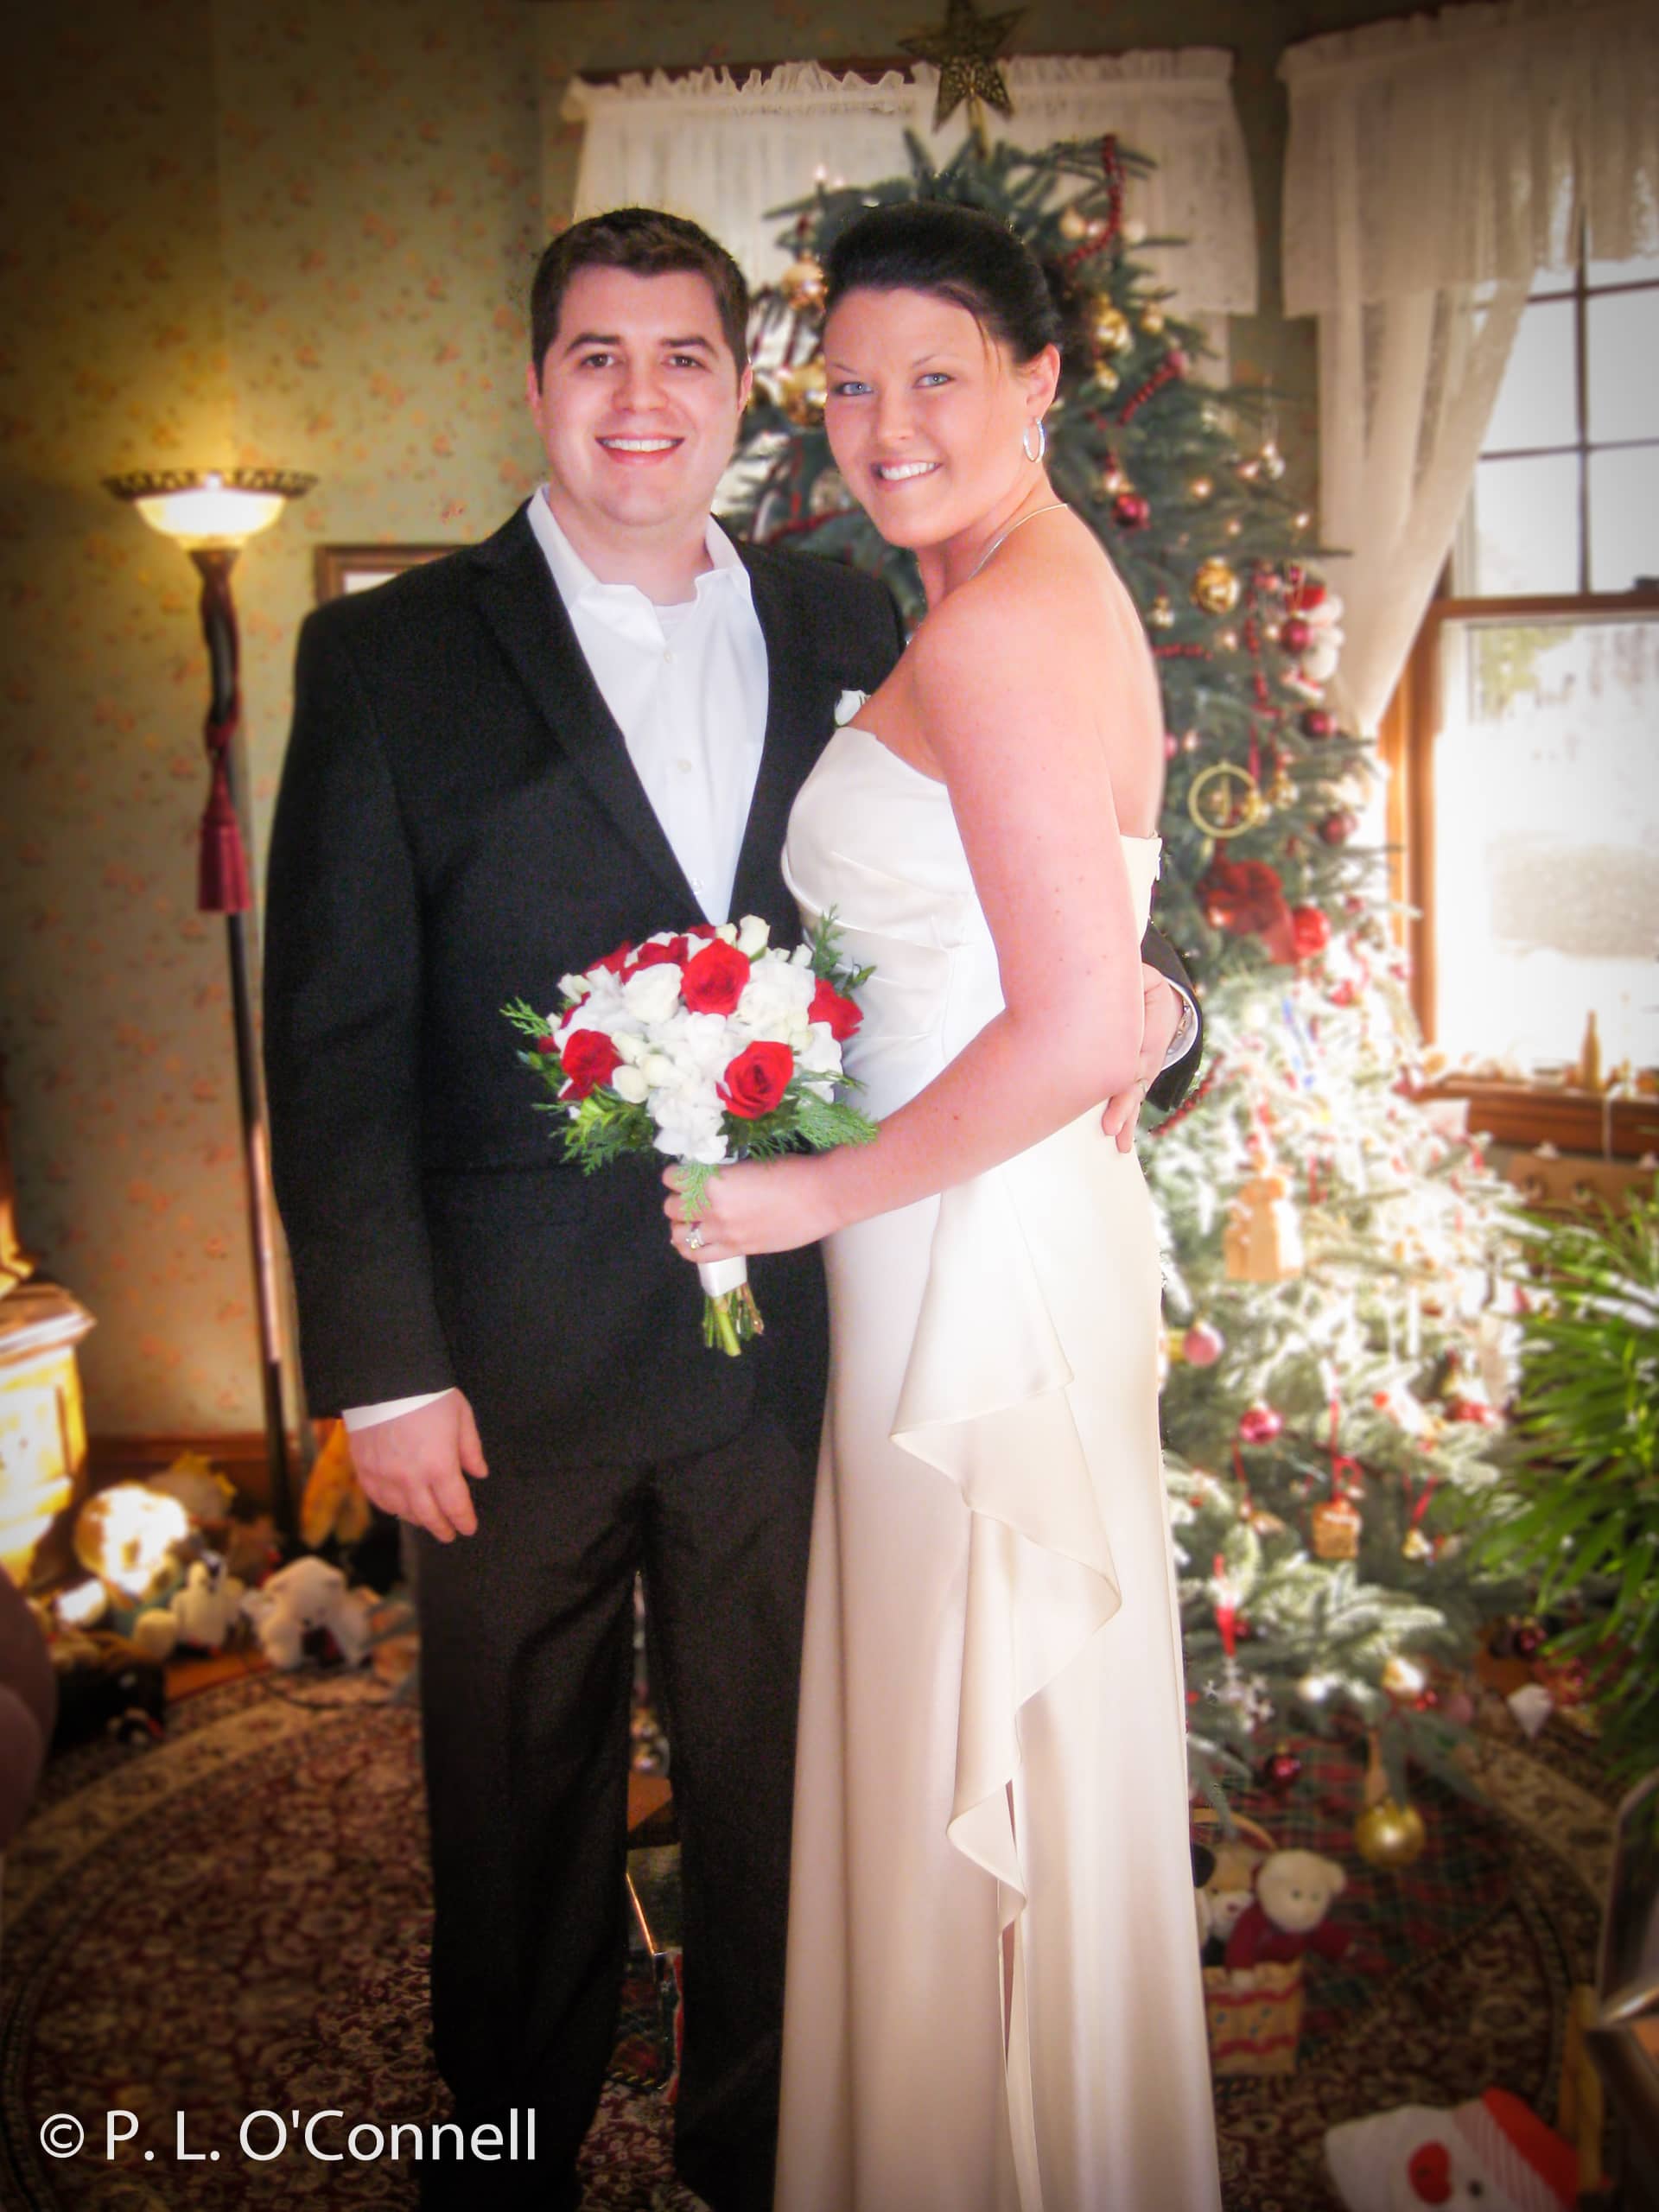 Winter weddings on Cape Cod by the Christmas tree